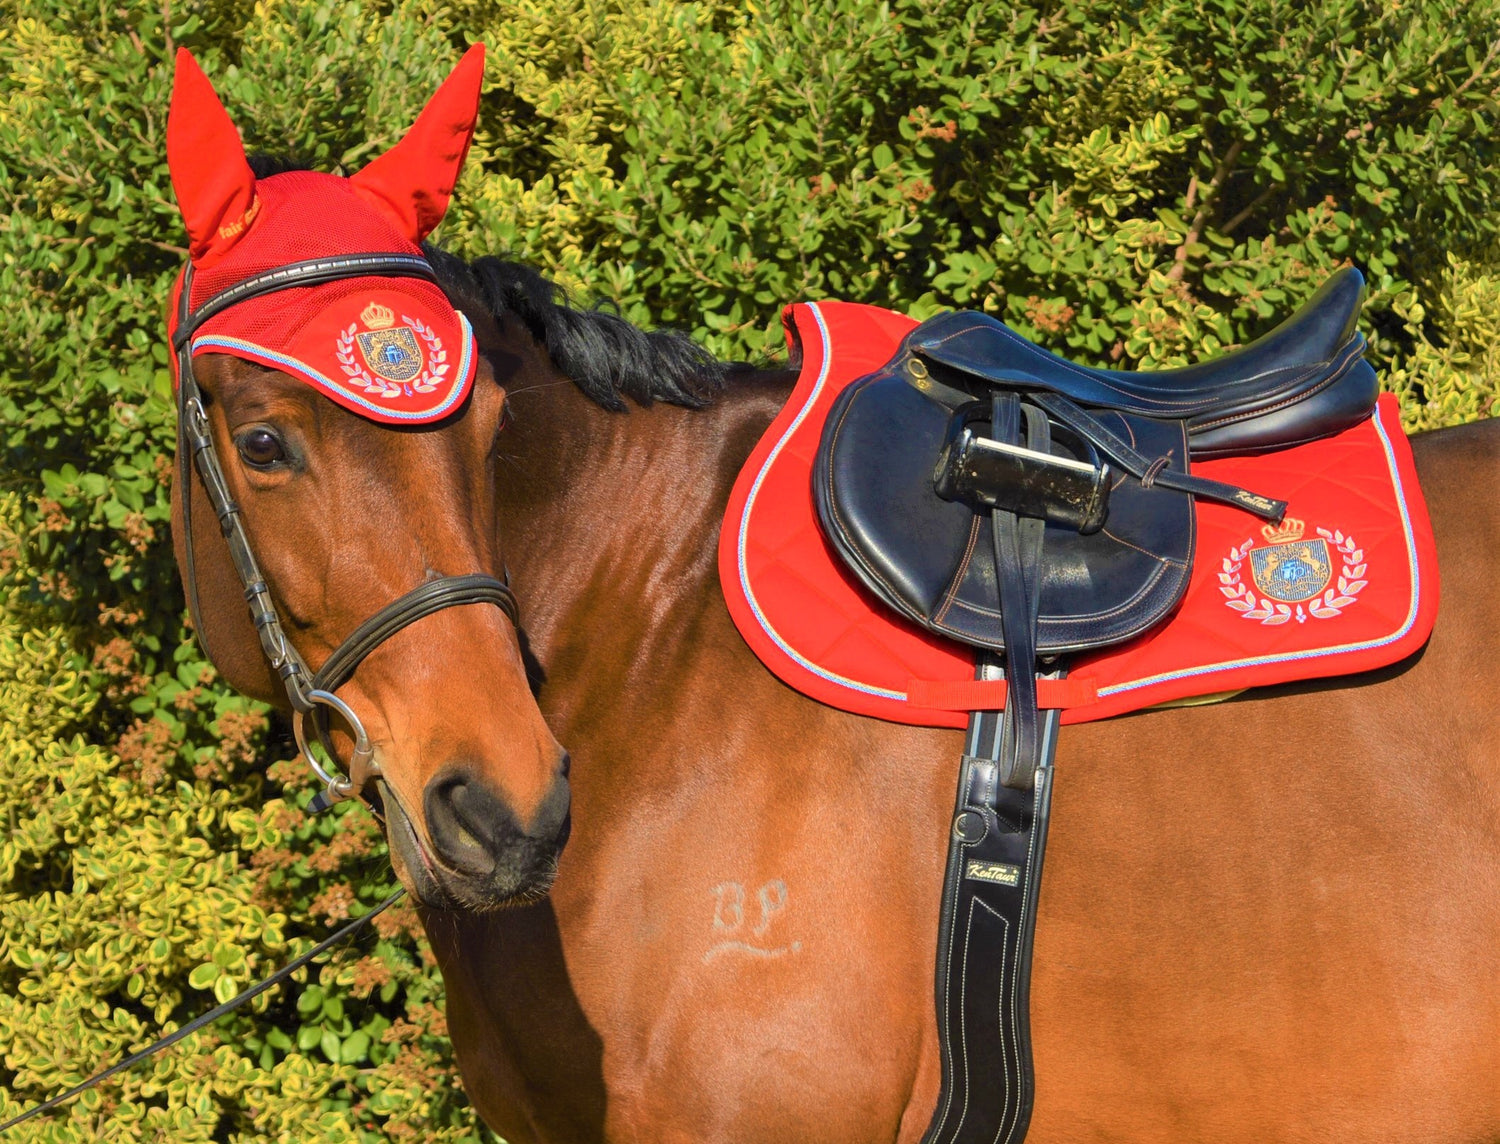 How to choose the right matching set for your horse